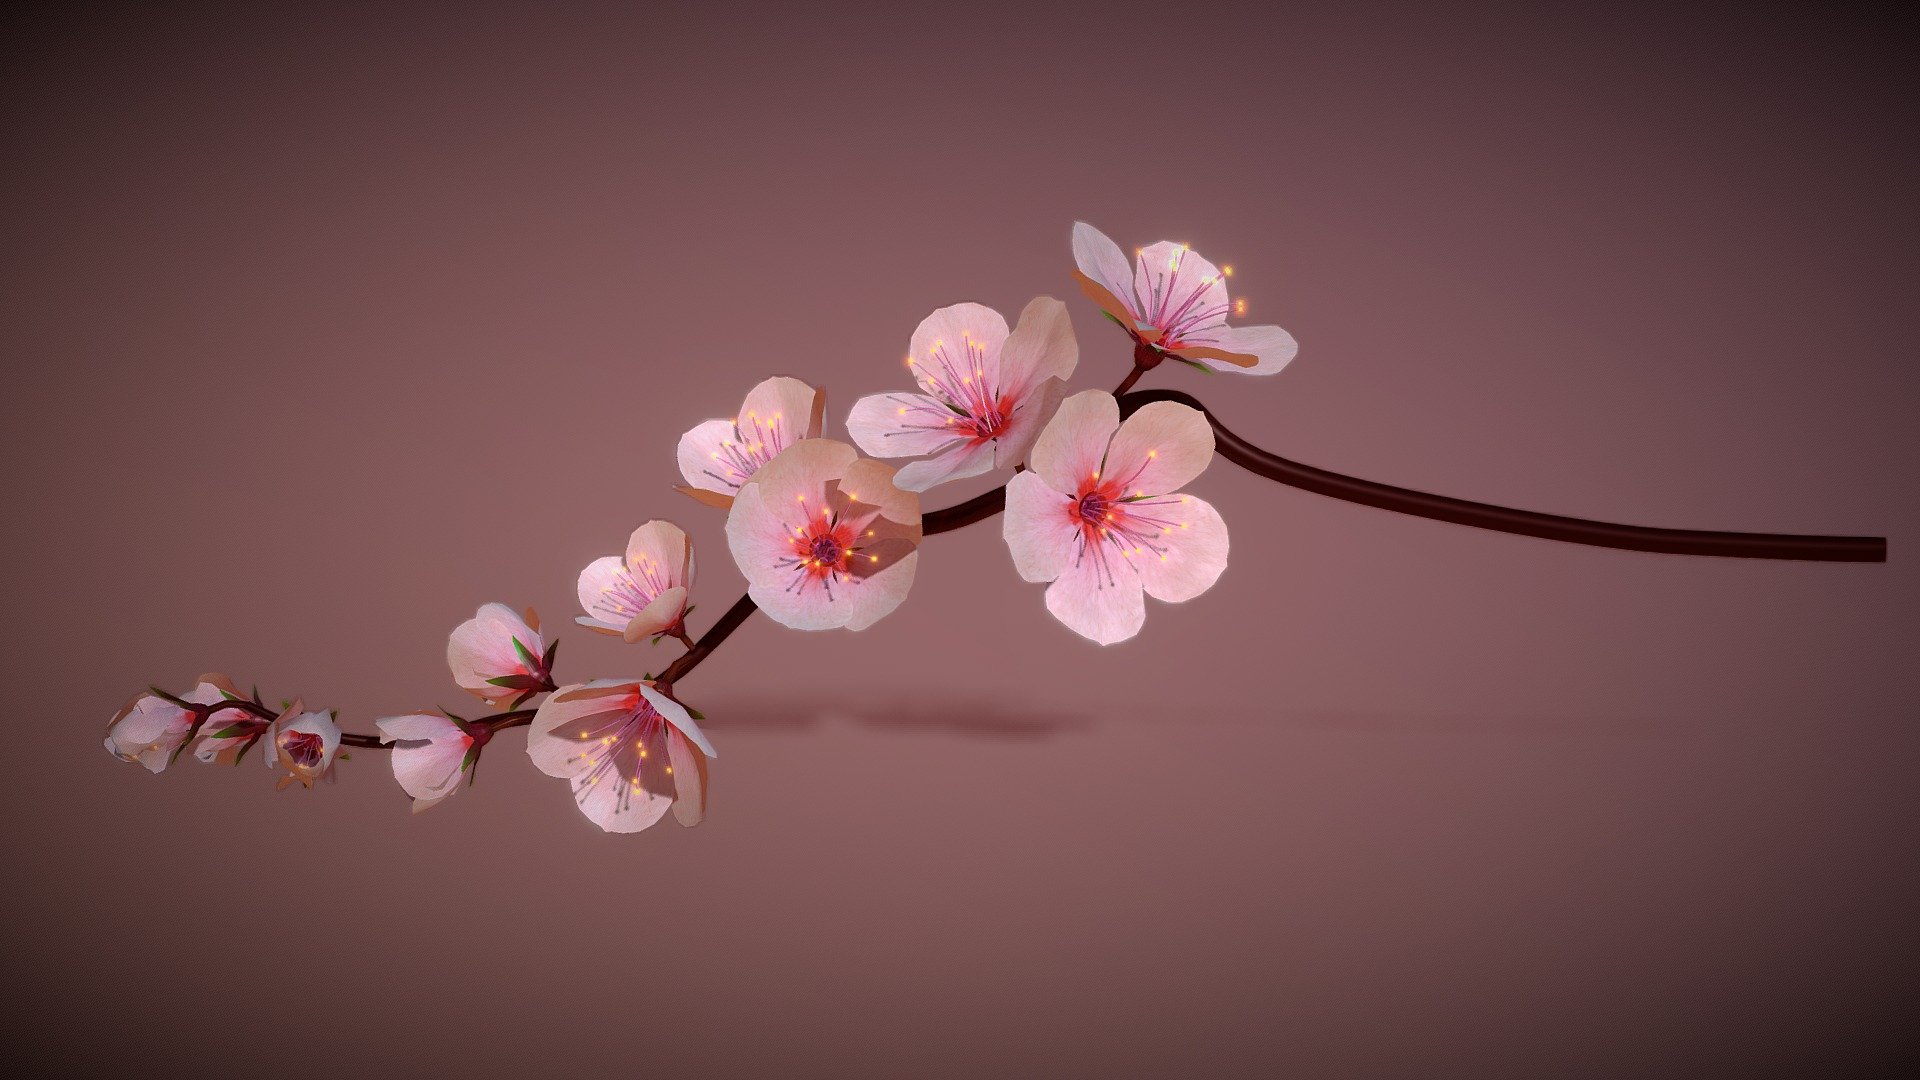 3d model maded in Blender 2.81
The original Blender file have particle system for each blossom
rigged and animated with bones - Cherry Blossoms Branch Rigged Animated - Buy Royalty Free 3D model by pinotoon 3d model